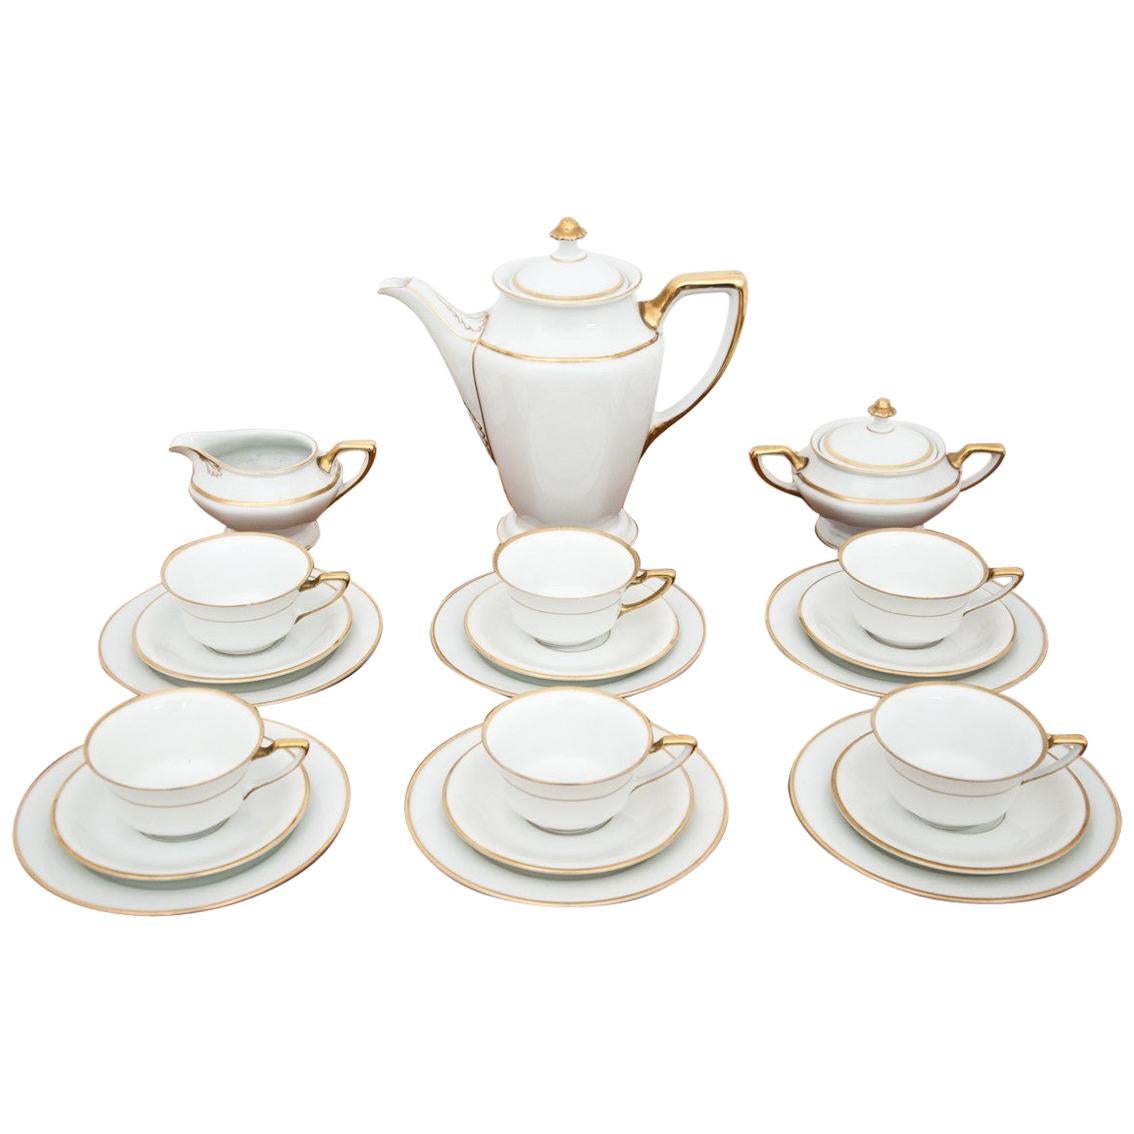 Rosenthal Coffee Service for 6 People